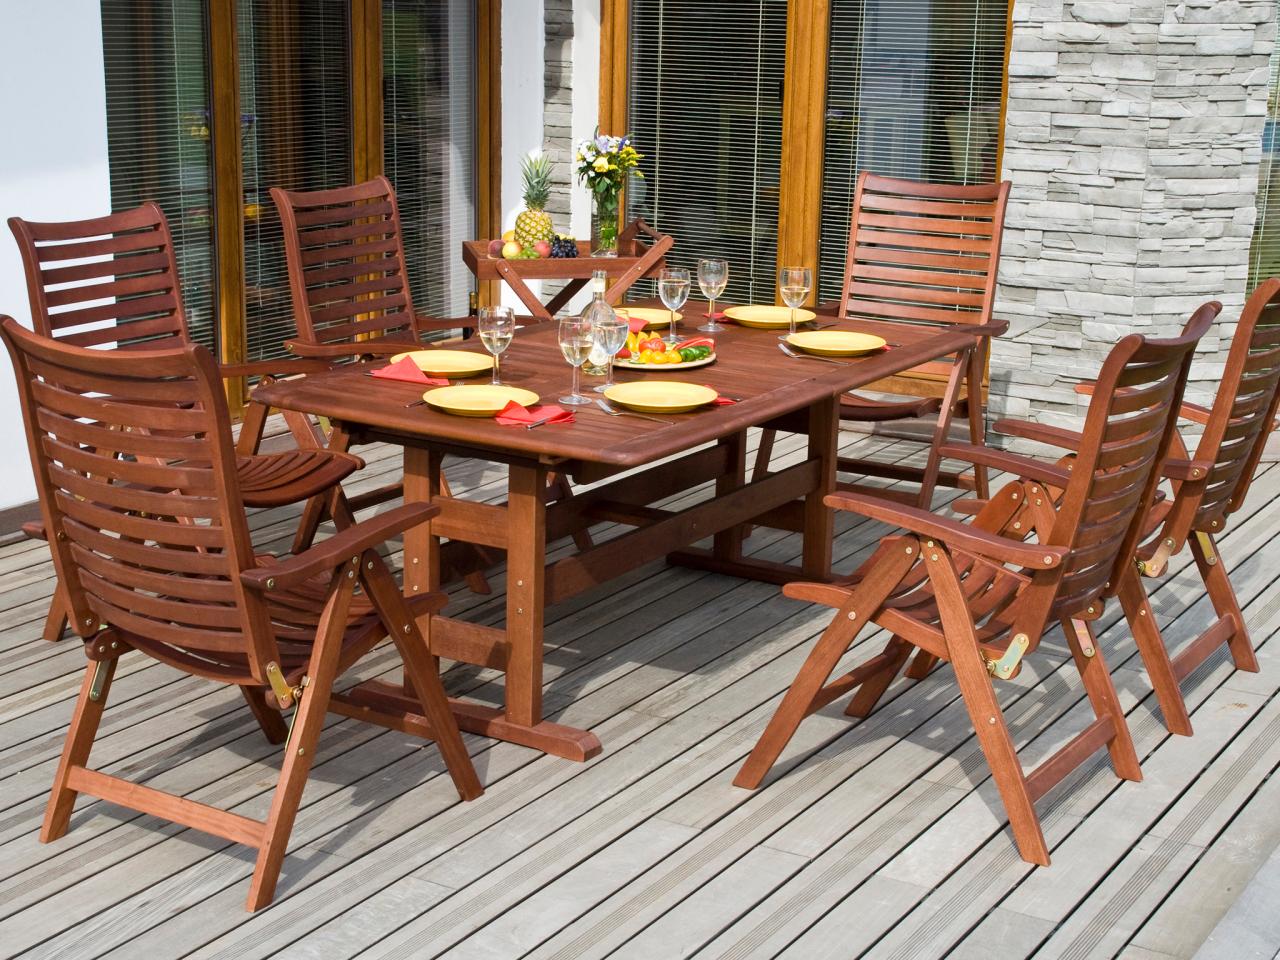 Choosing the right wood outdoor furniture for a field party